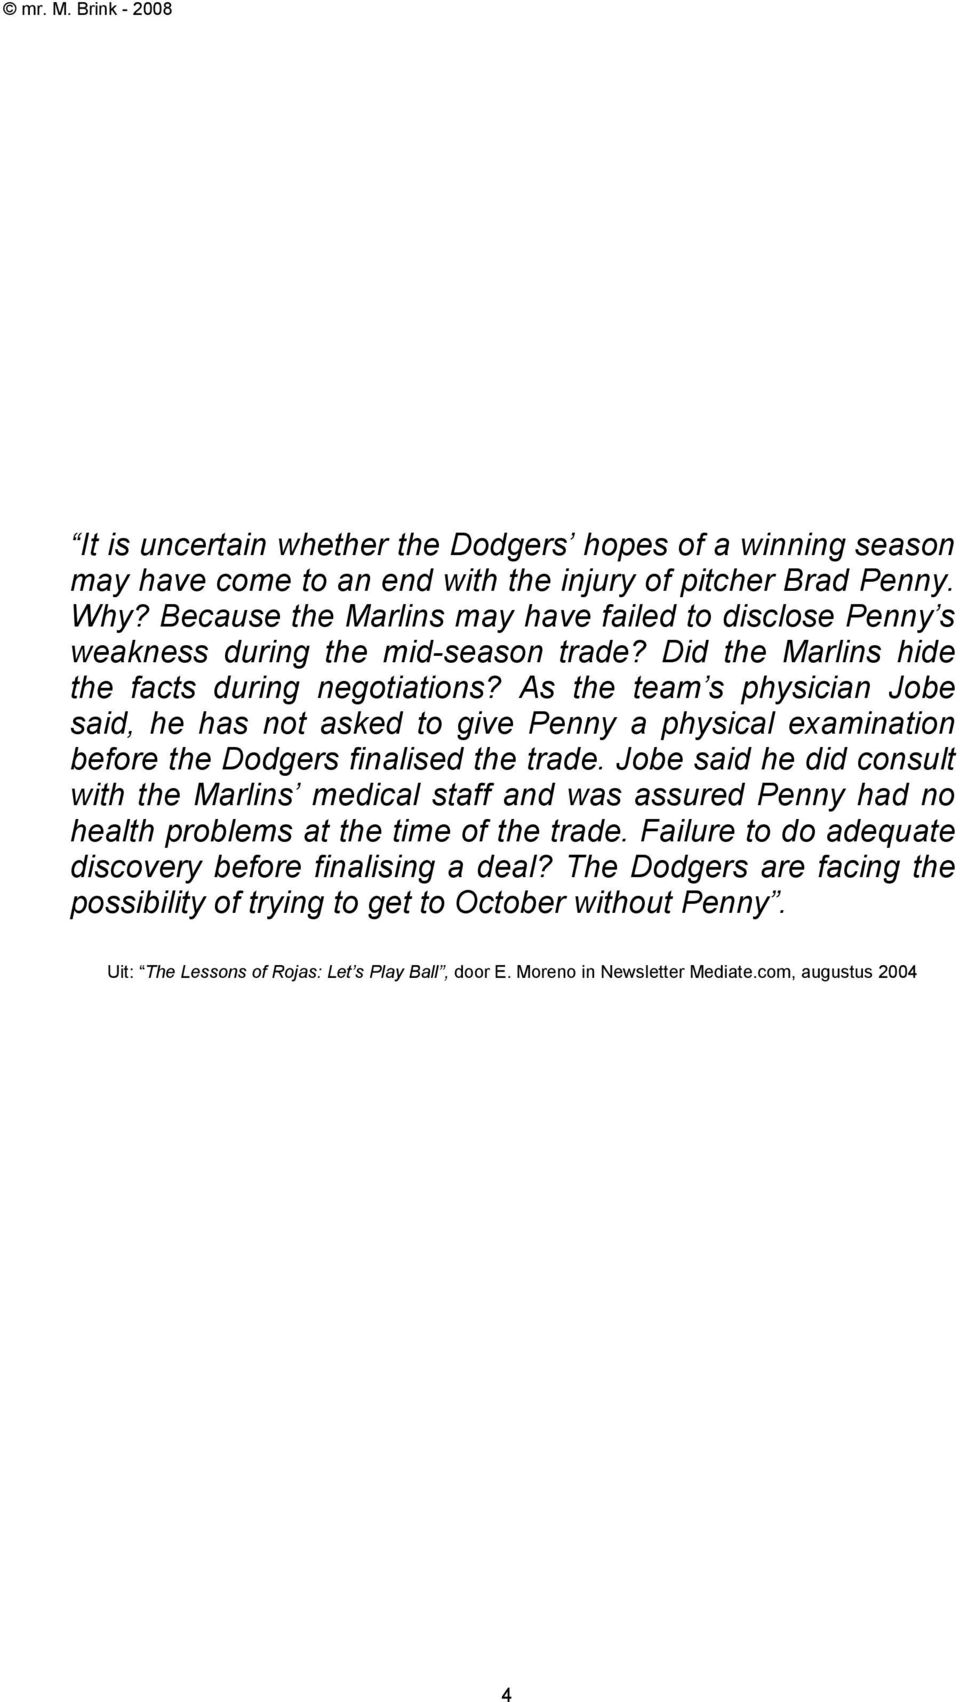 As the team s physician Jobe said, he has not asked to give Penny a physical examination before the Dodgers finalised the trade.